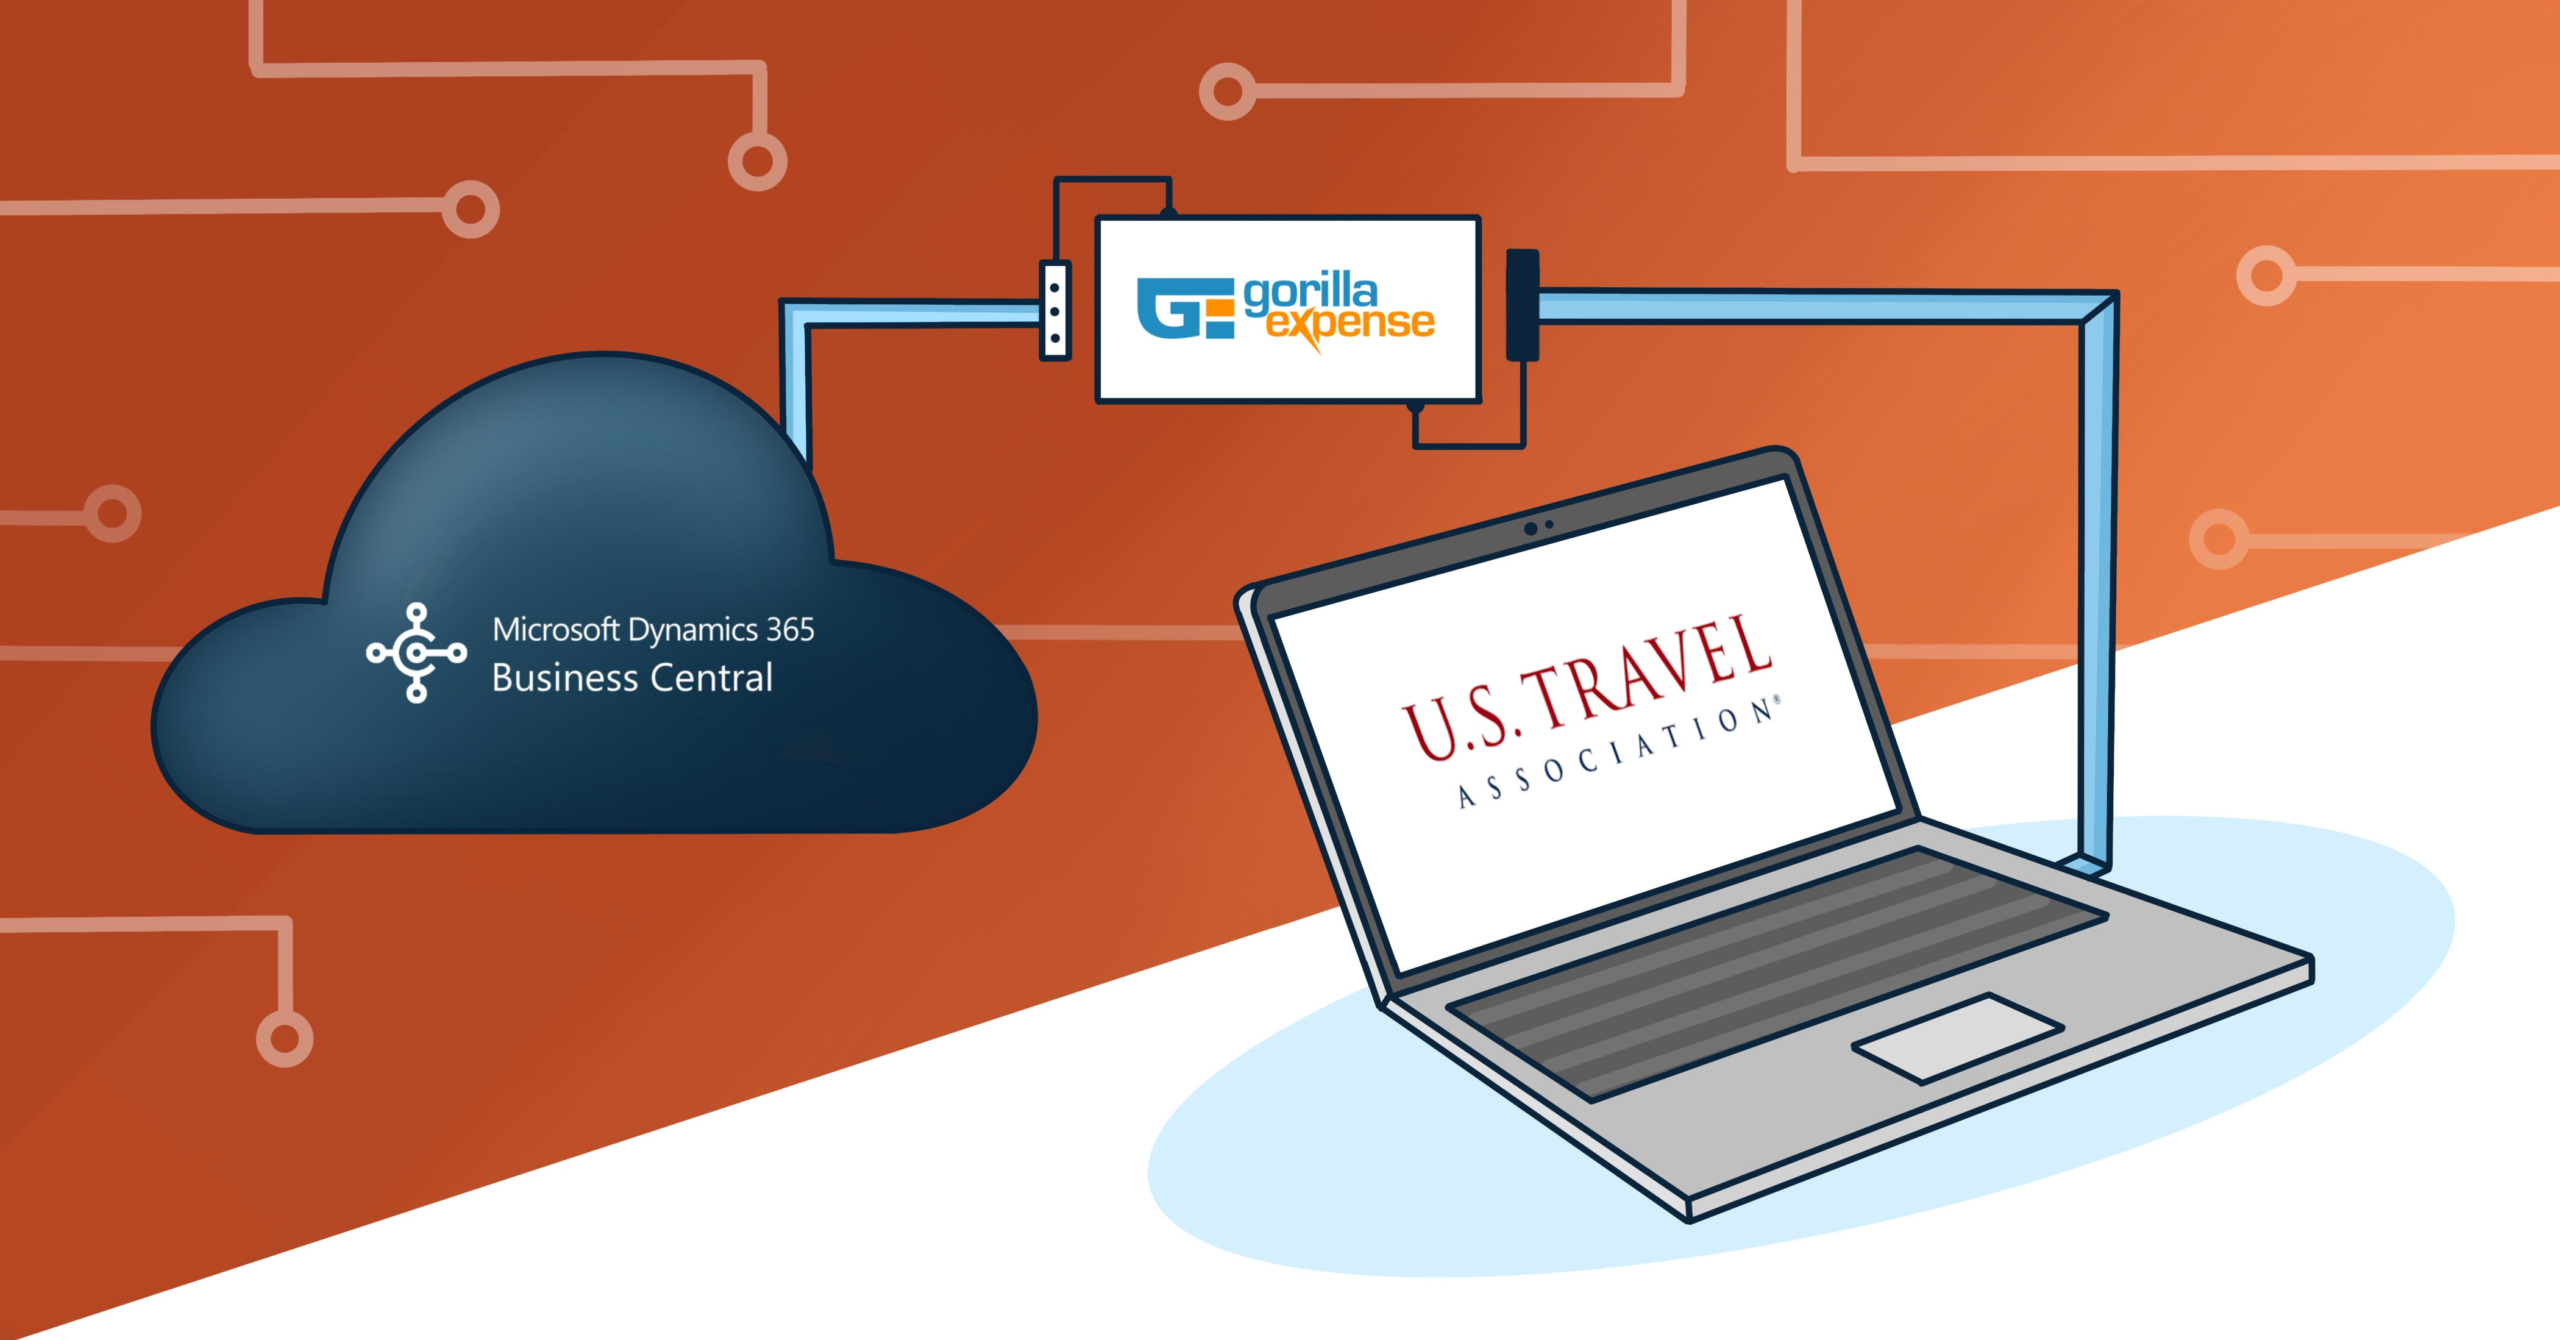 Case Study: How U.S. Travel Association upgraded from Microsoft Great Plains to Business Central with Gorilla Expense